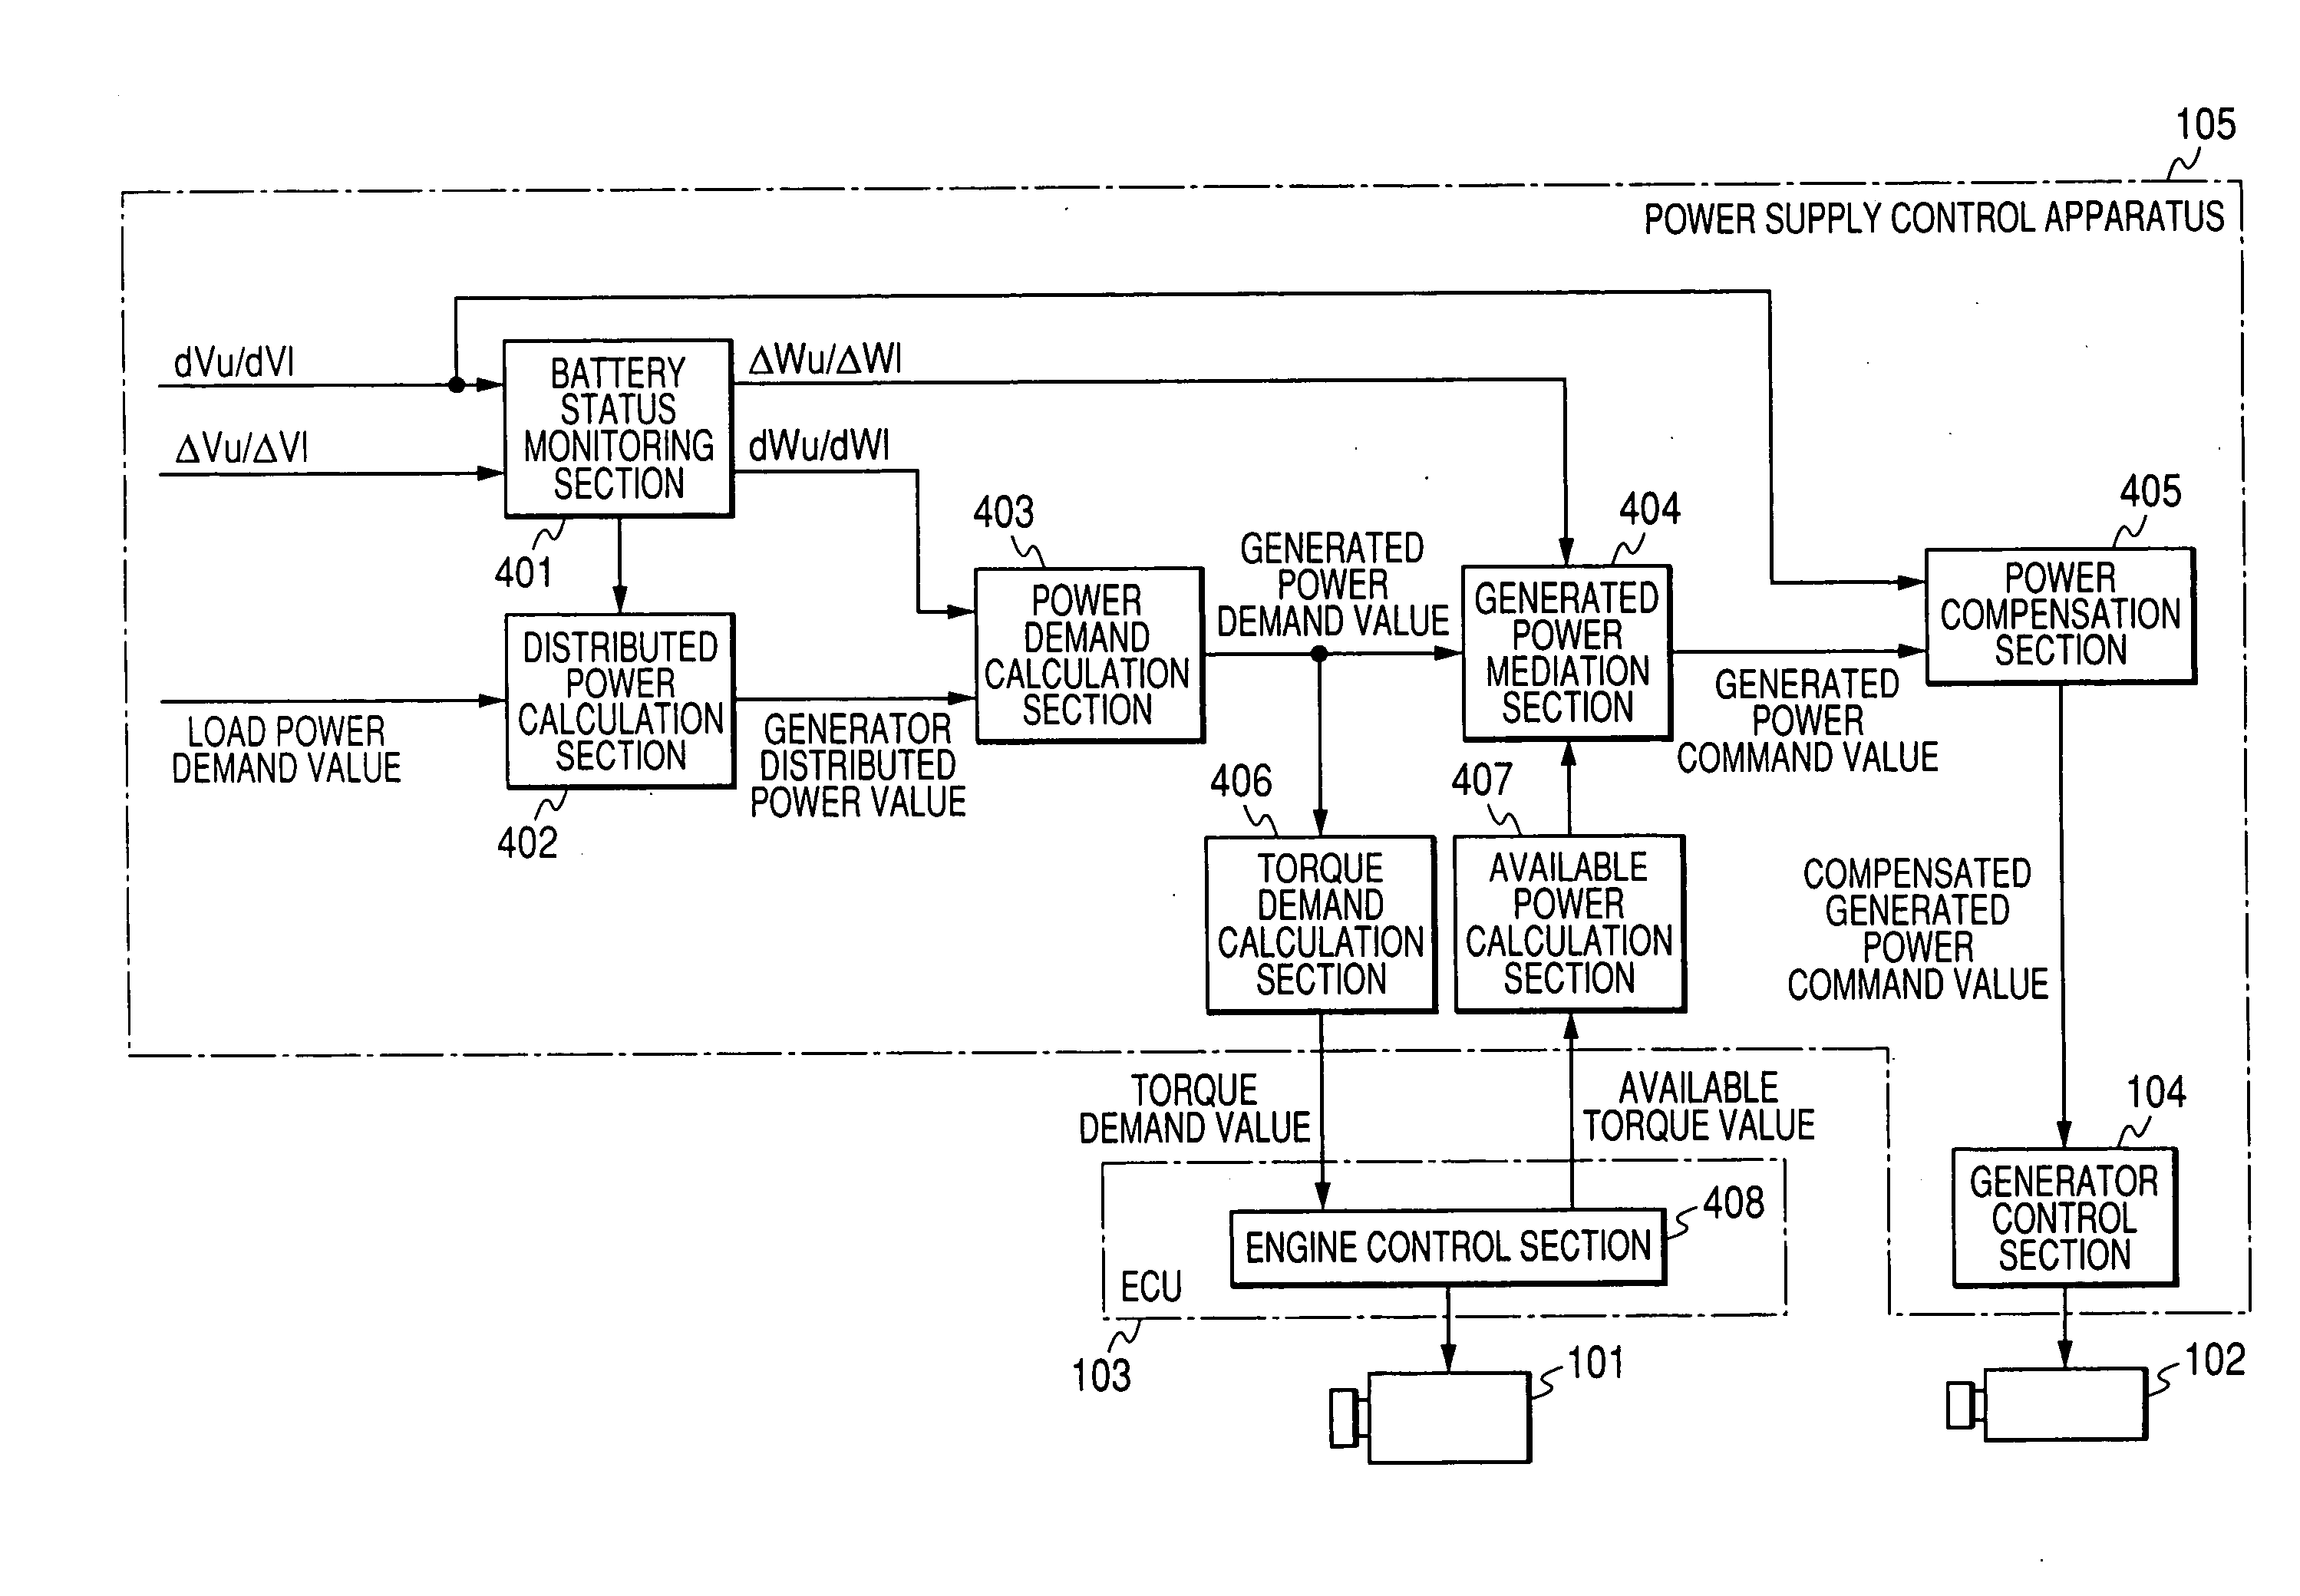 Electrical power supply system for motor vehicle